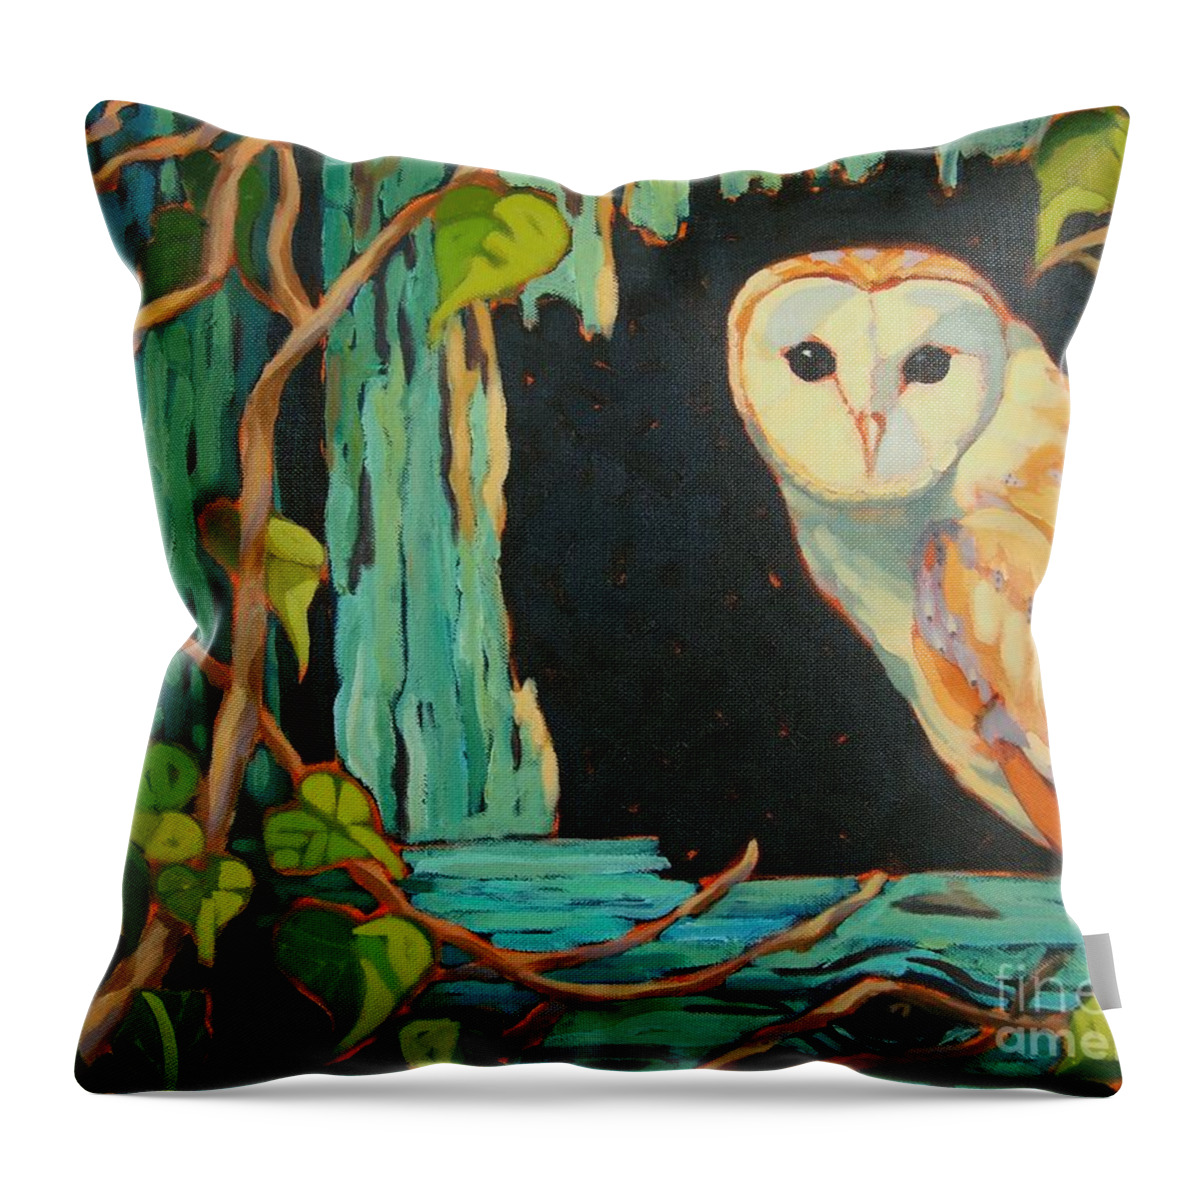 Owl Throw Pillow featuring the painting I See You by Janet McDonald